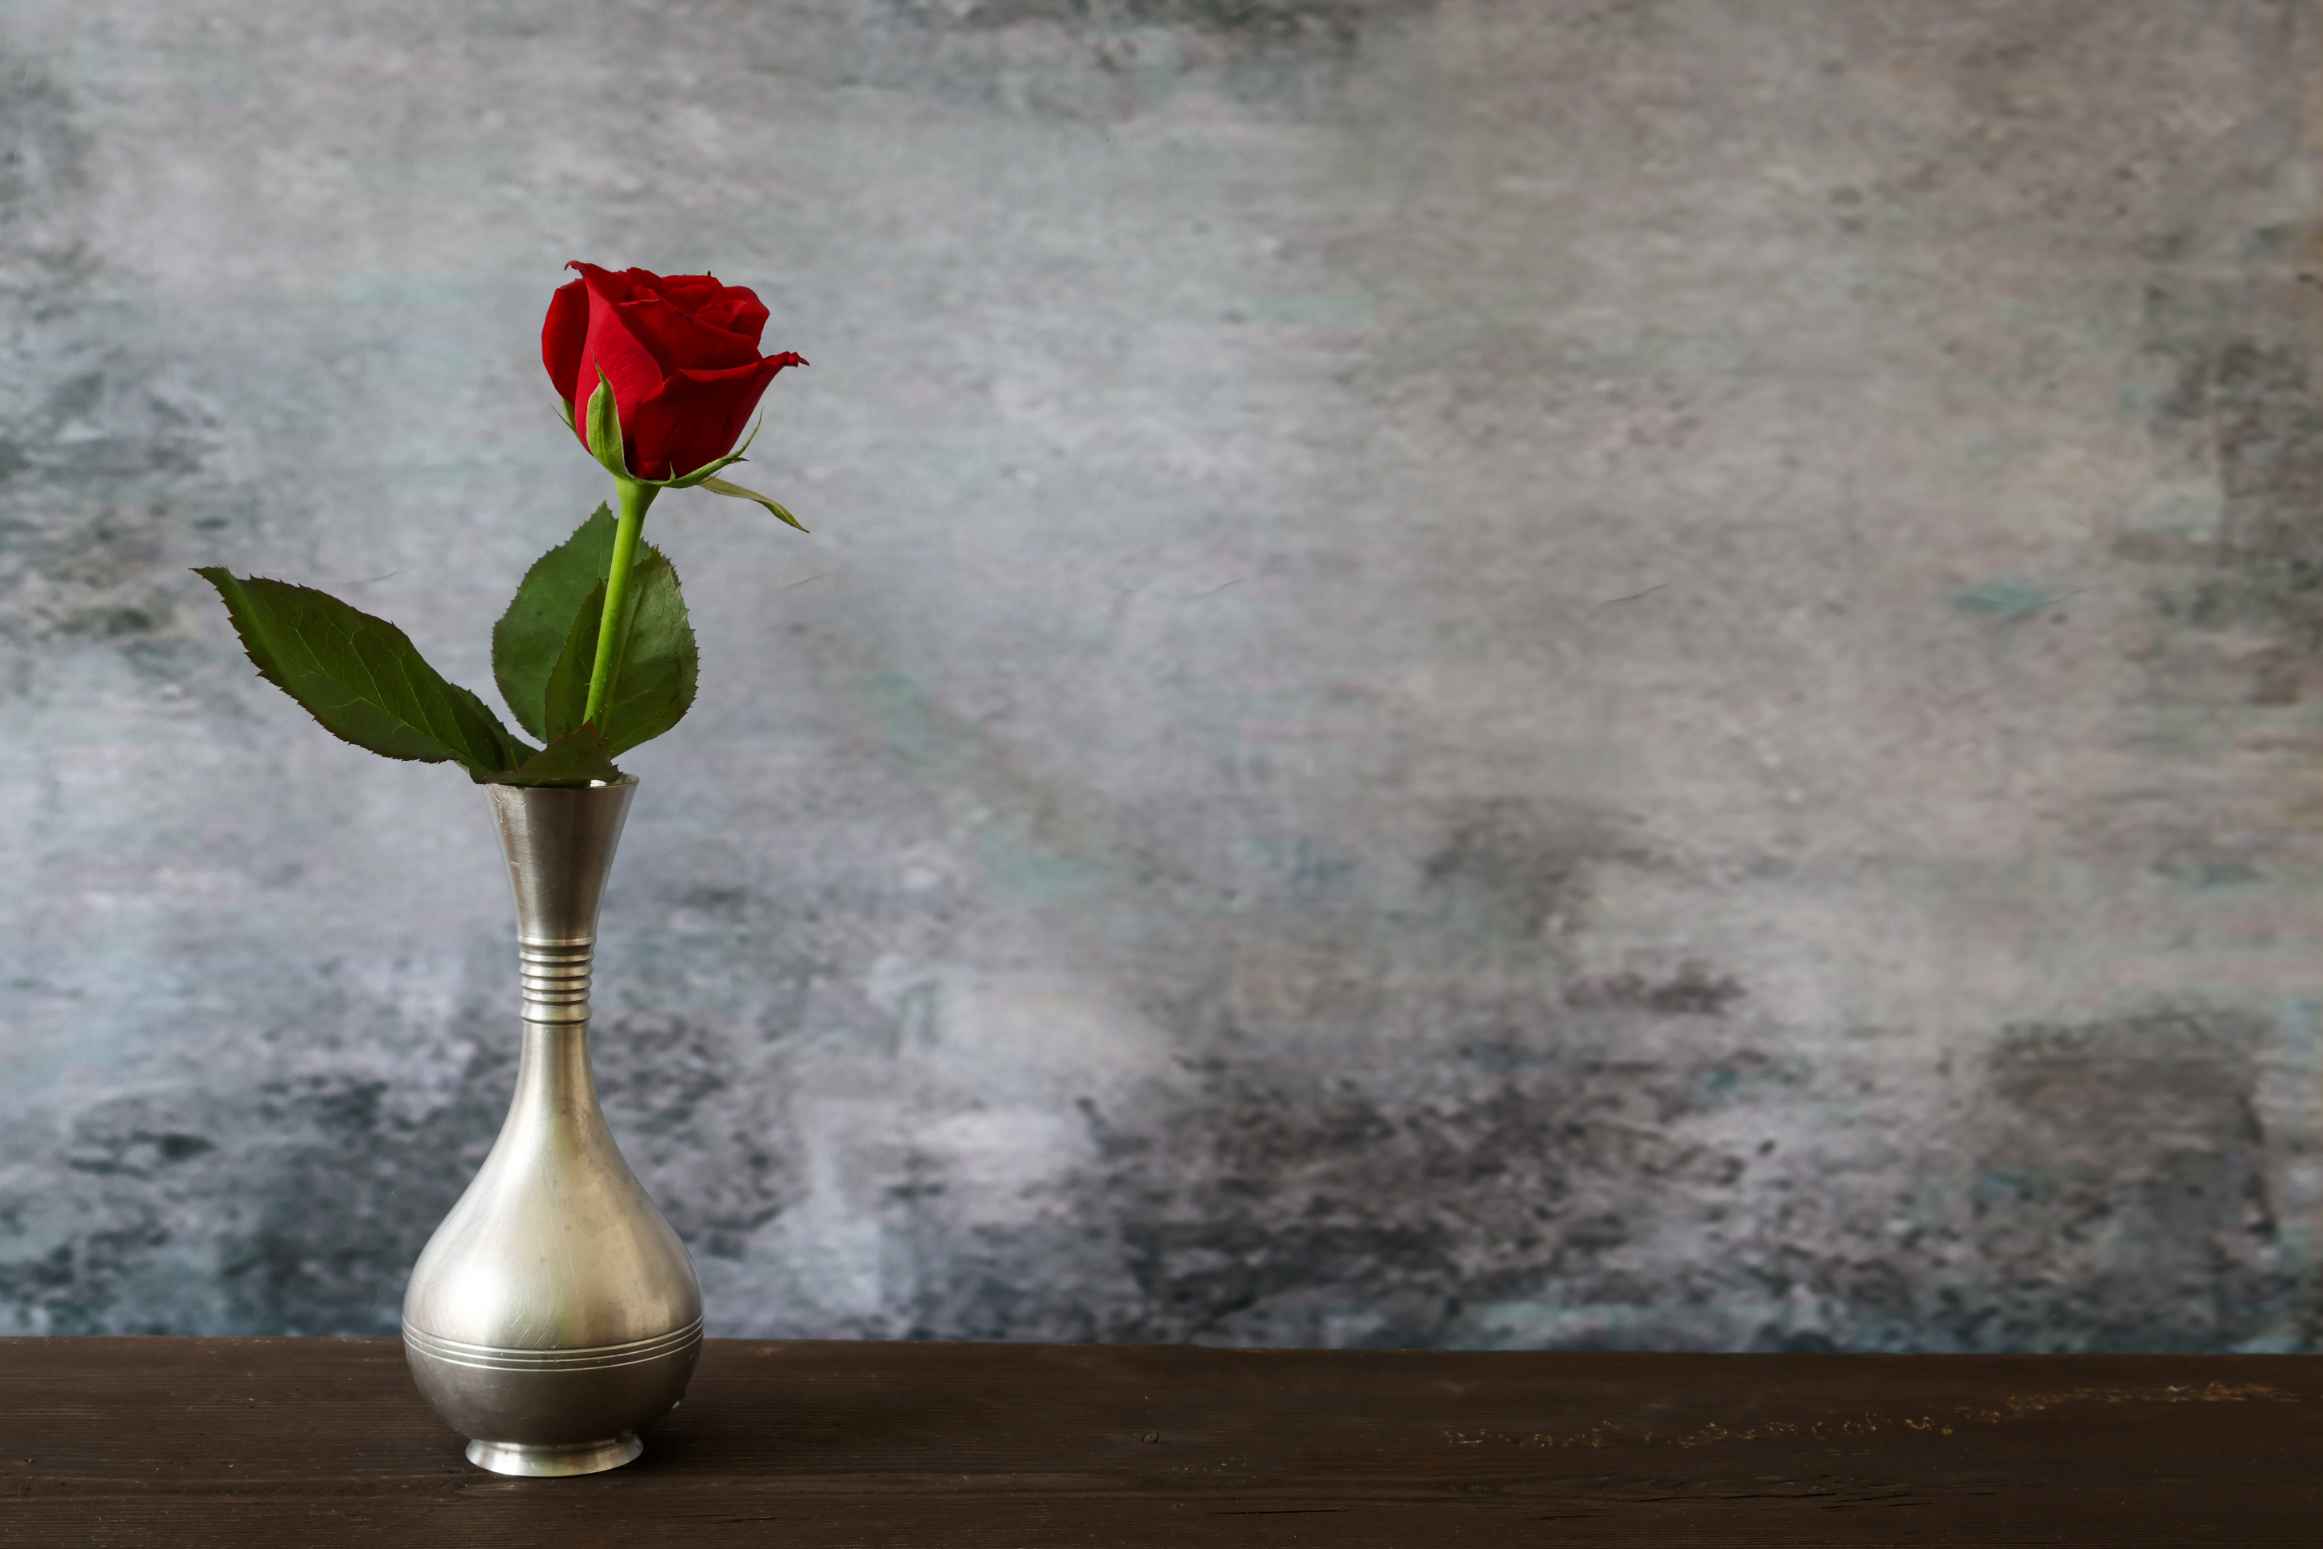 A red rose in the pewter vase on a table.